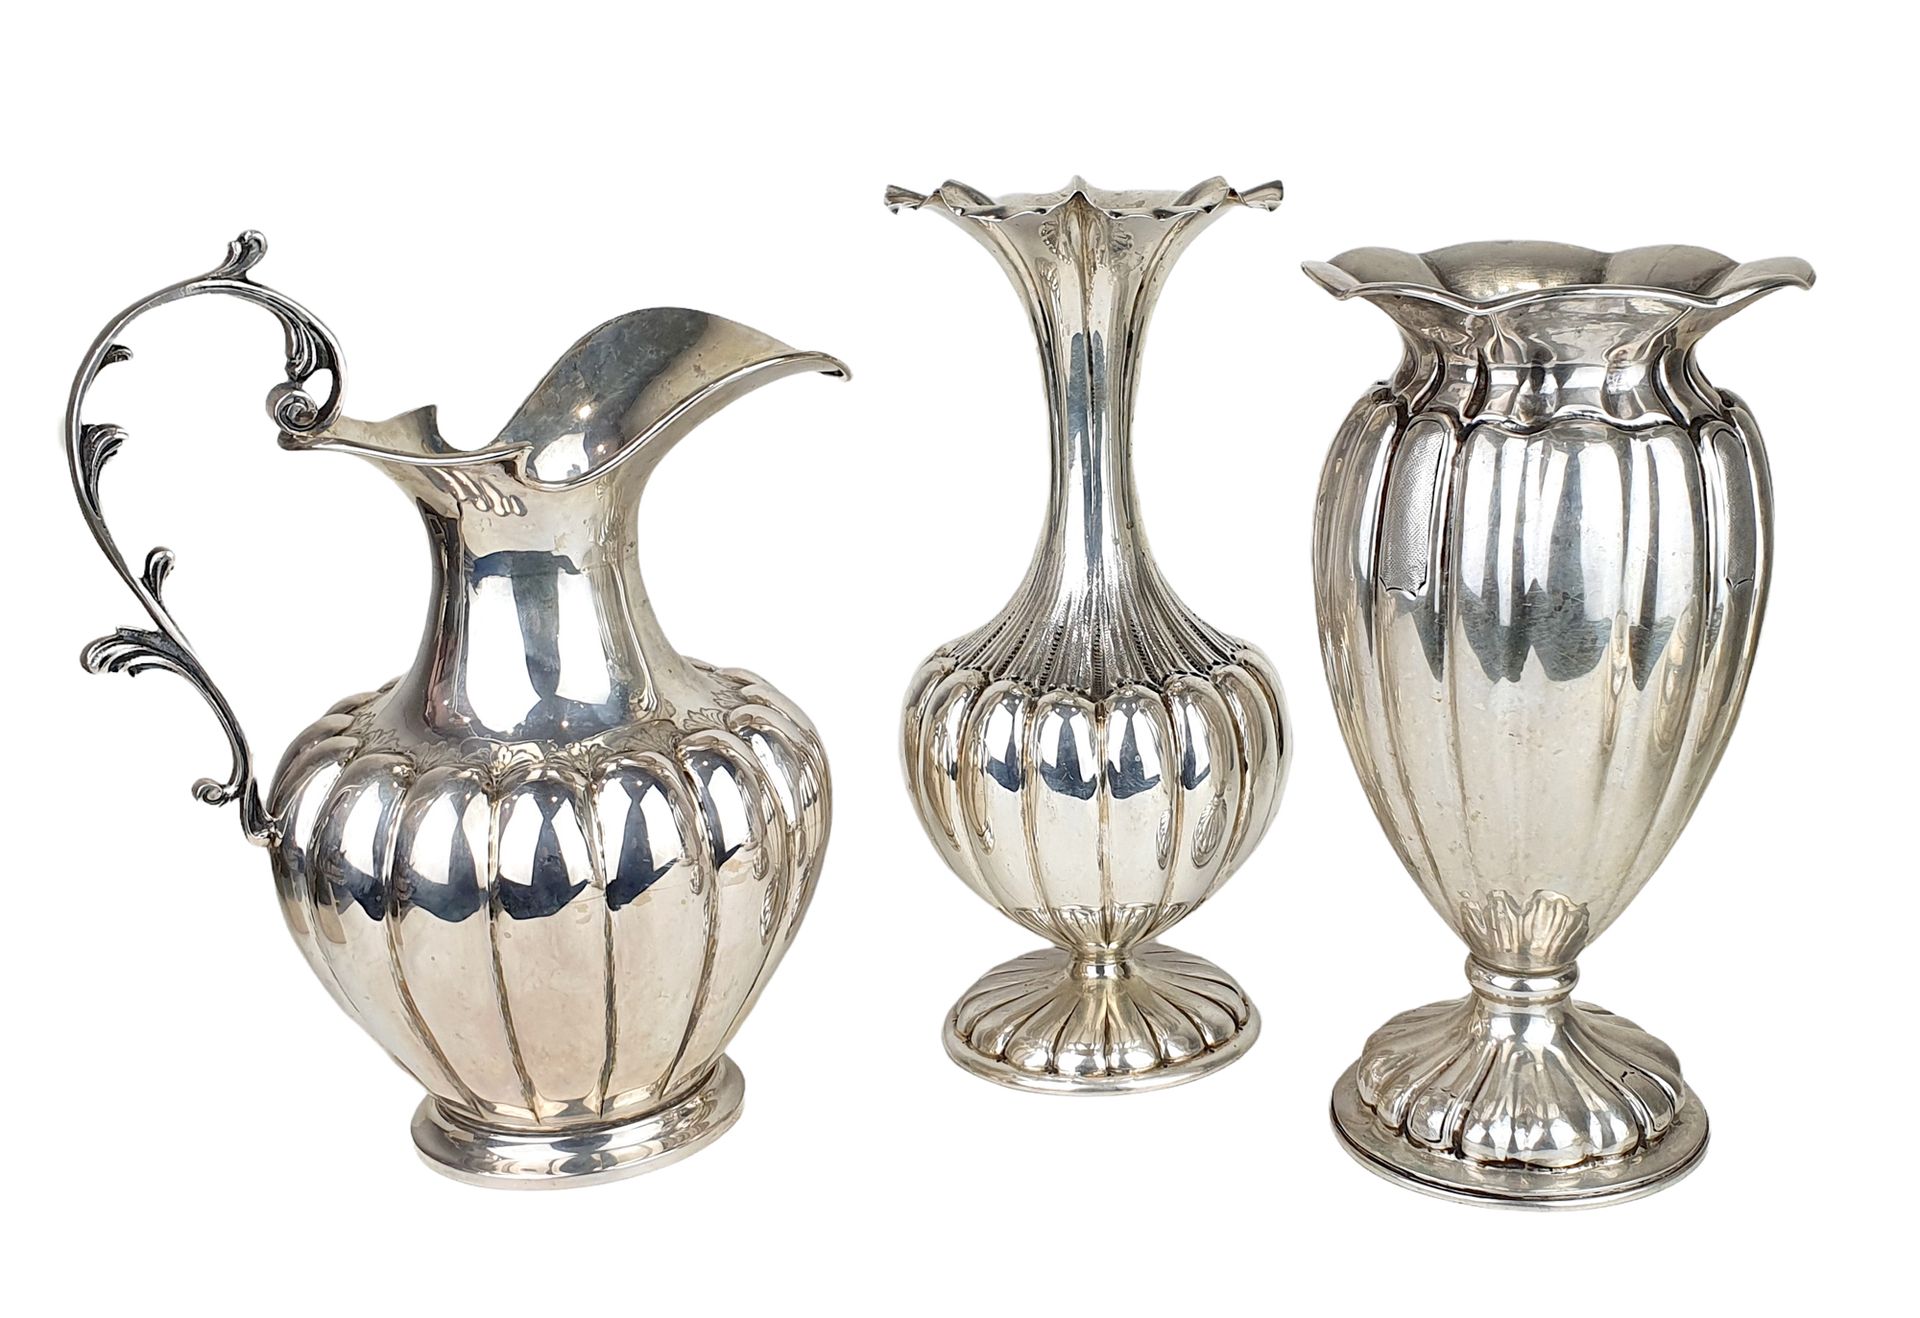 ARGENTERIE -

Set in silver 800/000 including two vases and a coffee pot with ga&hellip;